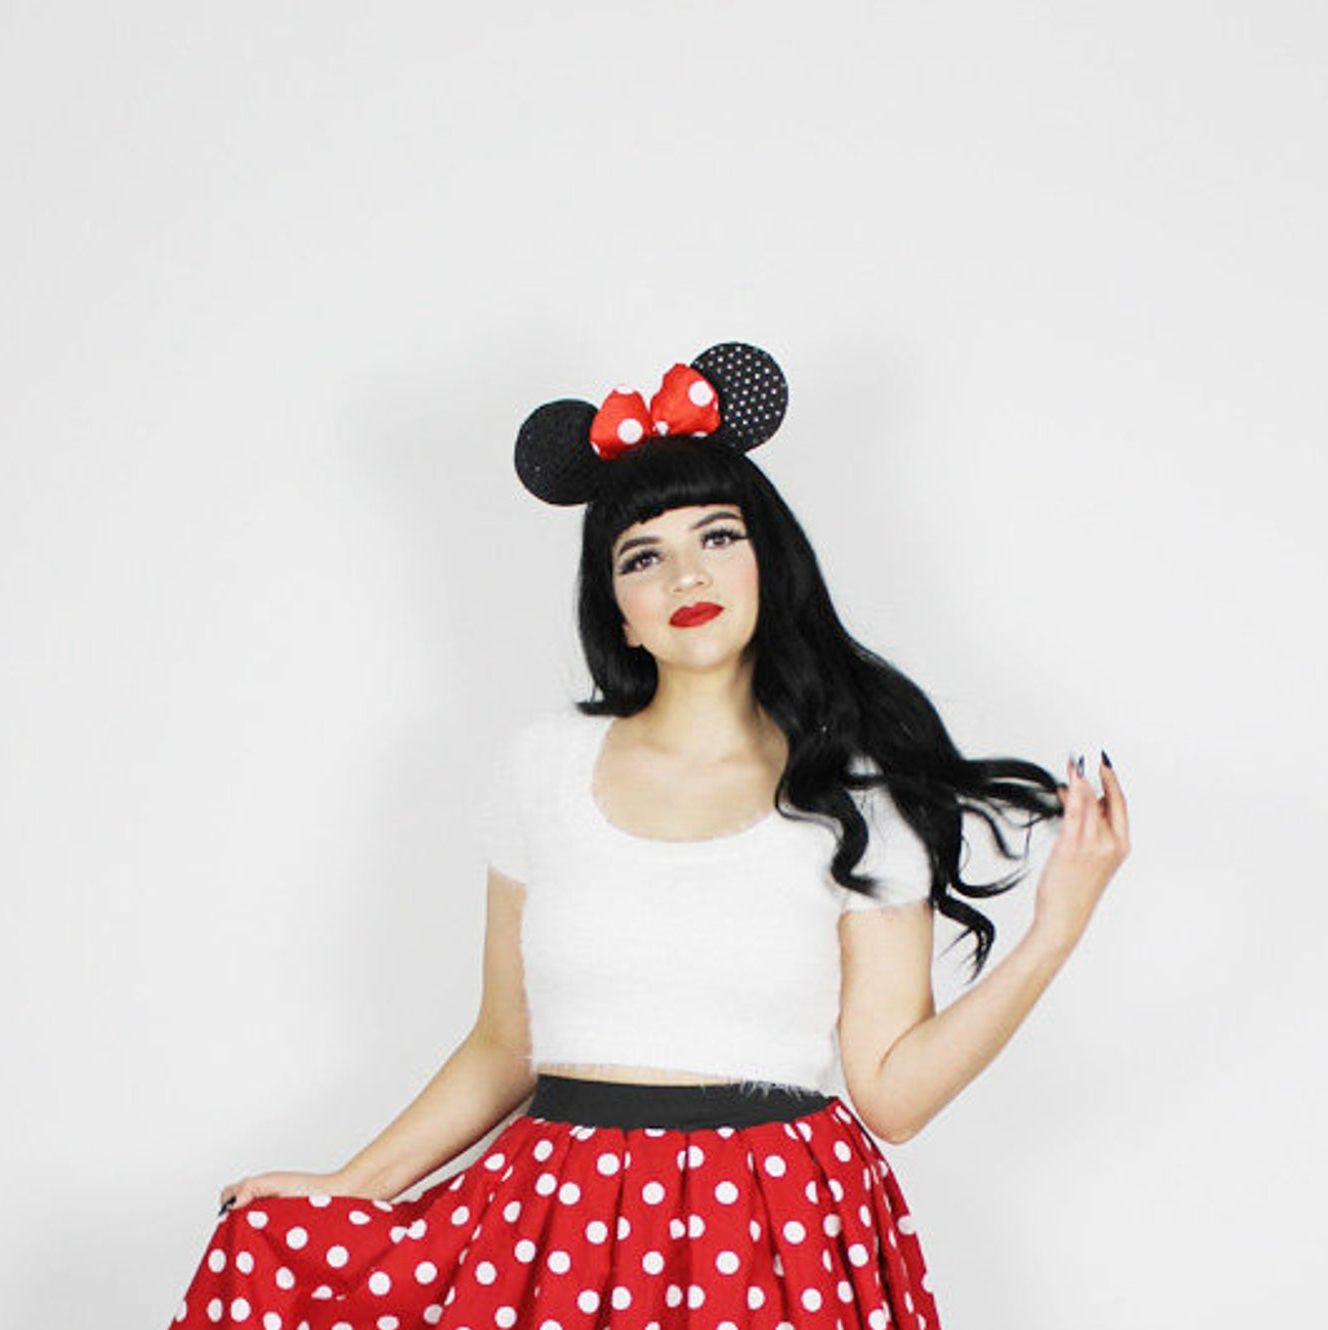 diy mickey mouse costume adult